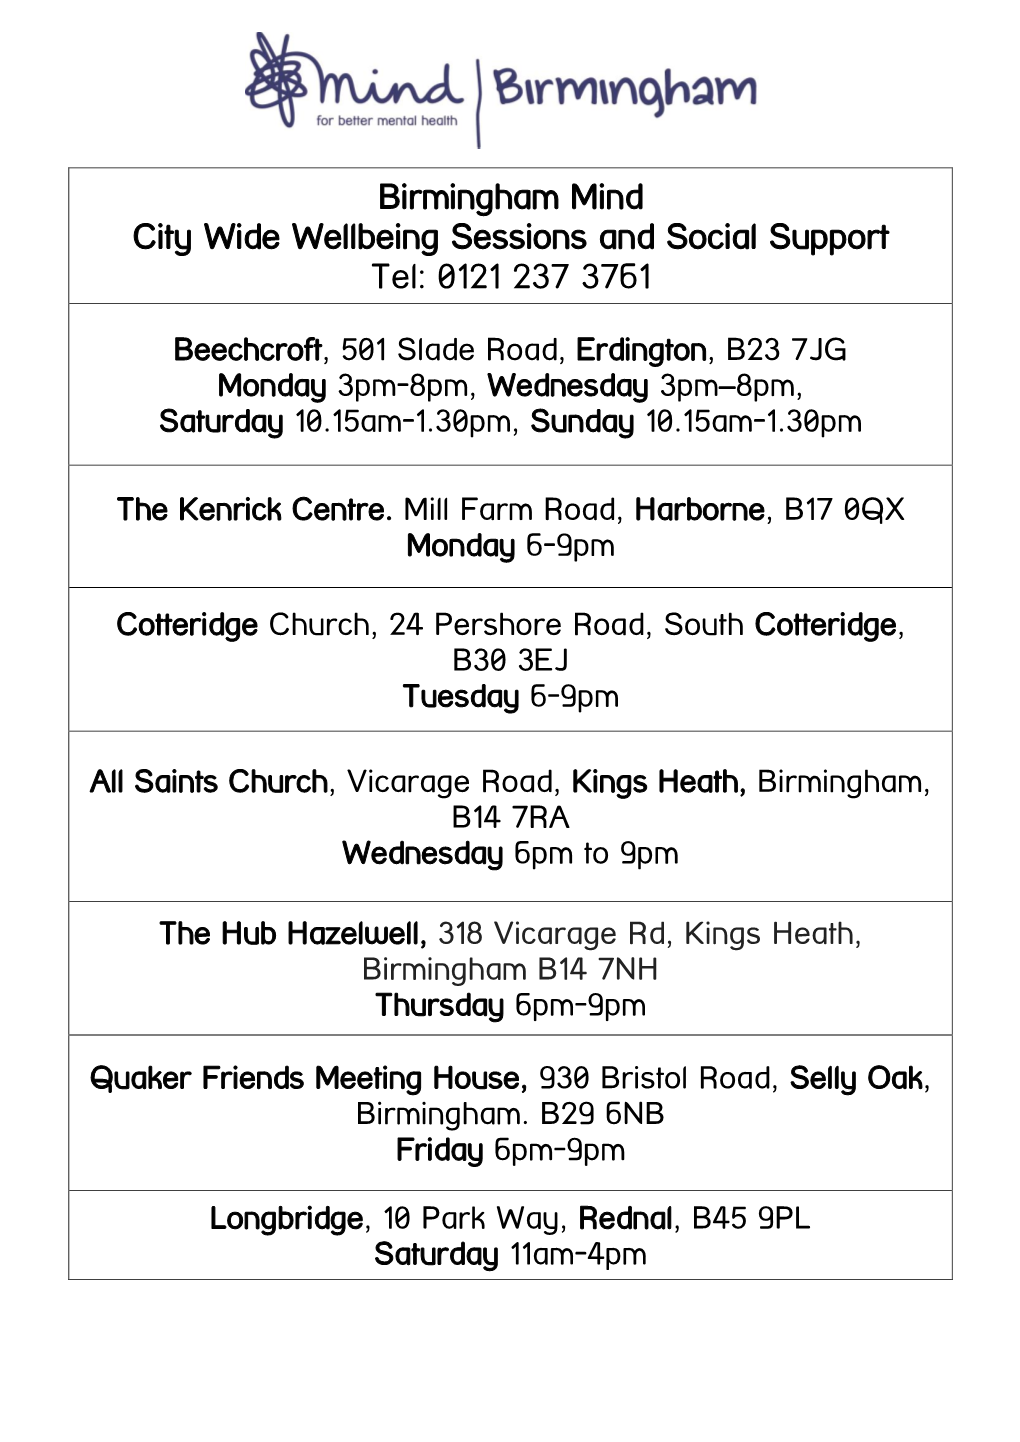 Birmingham Mind City Wide Wellbeing Sessions and Social Support Tel: 0121 237 3761